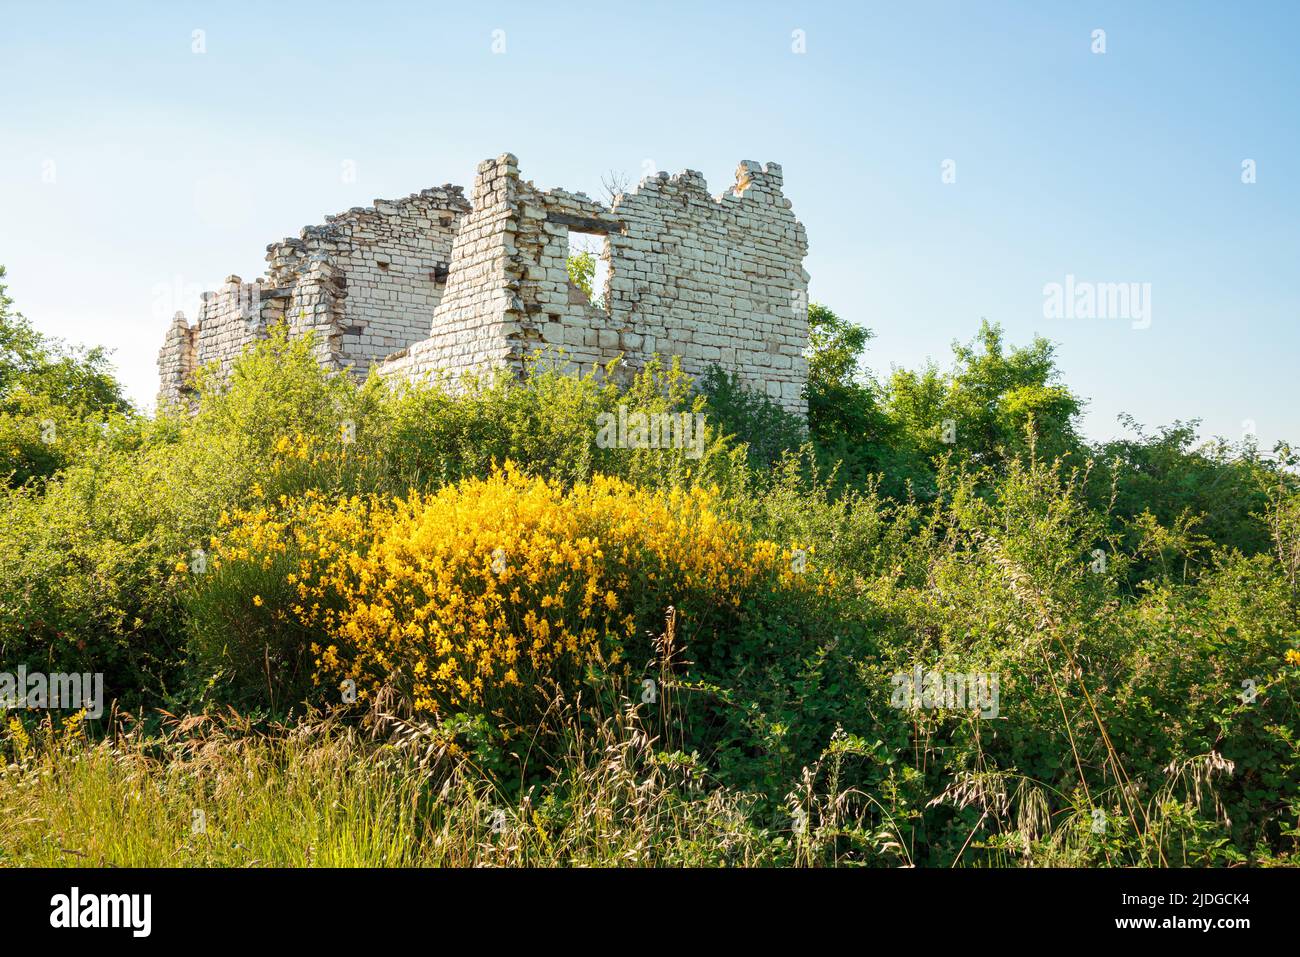 Ruin of an old stone house, in the Cesane mountains in Italy, Marche, close to Pesaro and Urbino. Various plants like broom and other herbs groe aroun Stock Photo